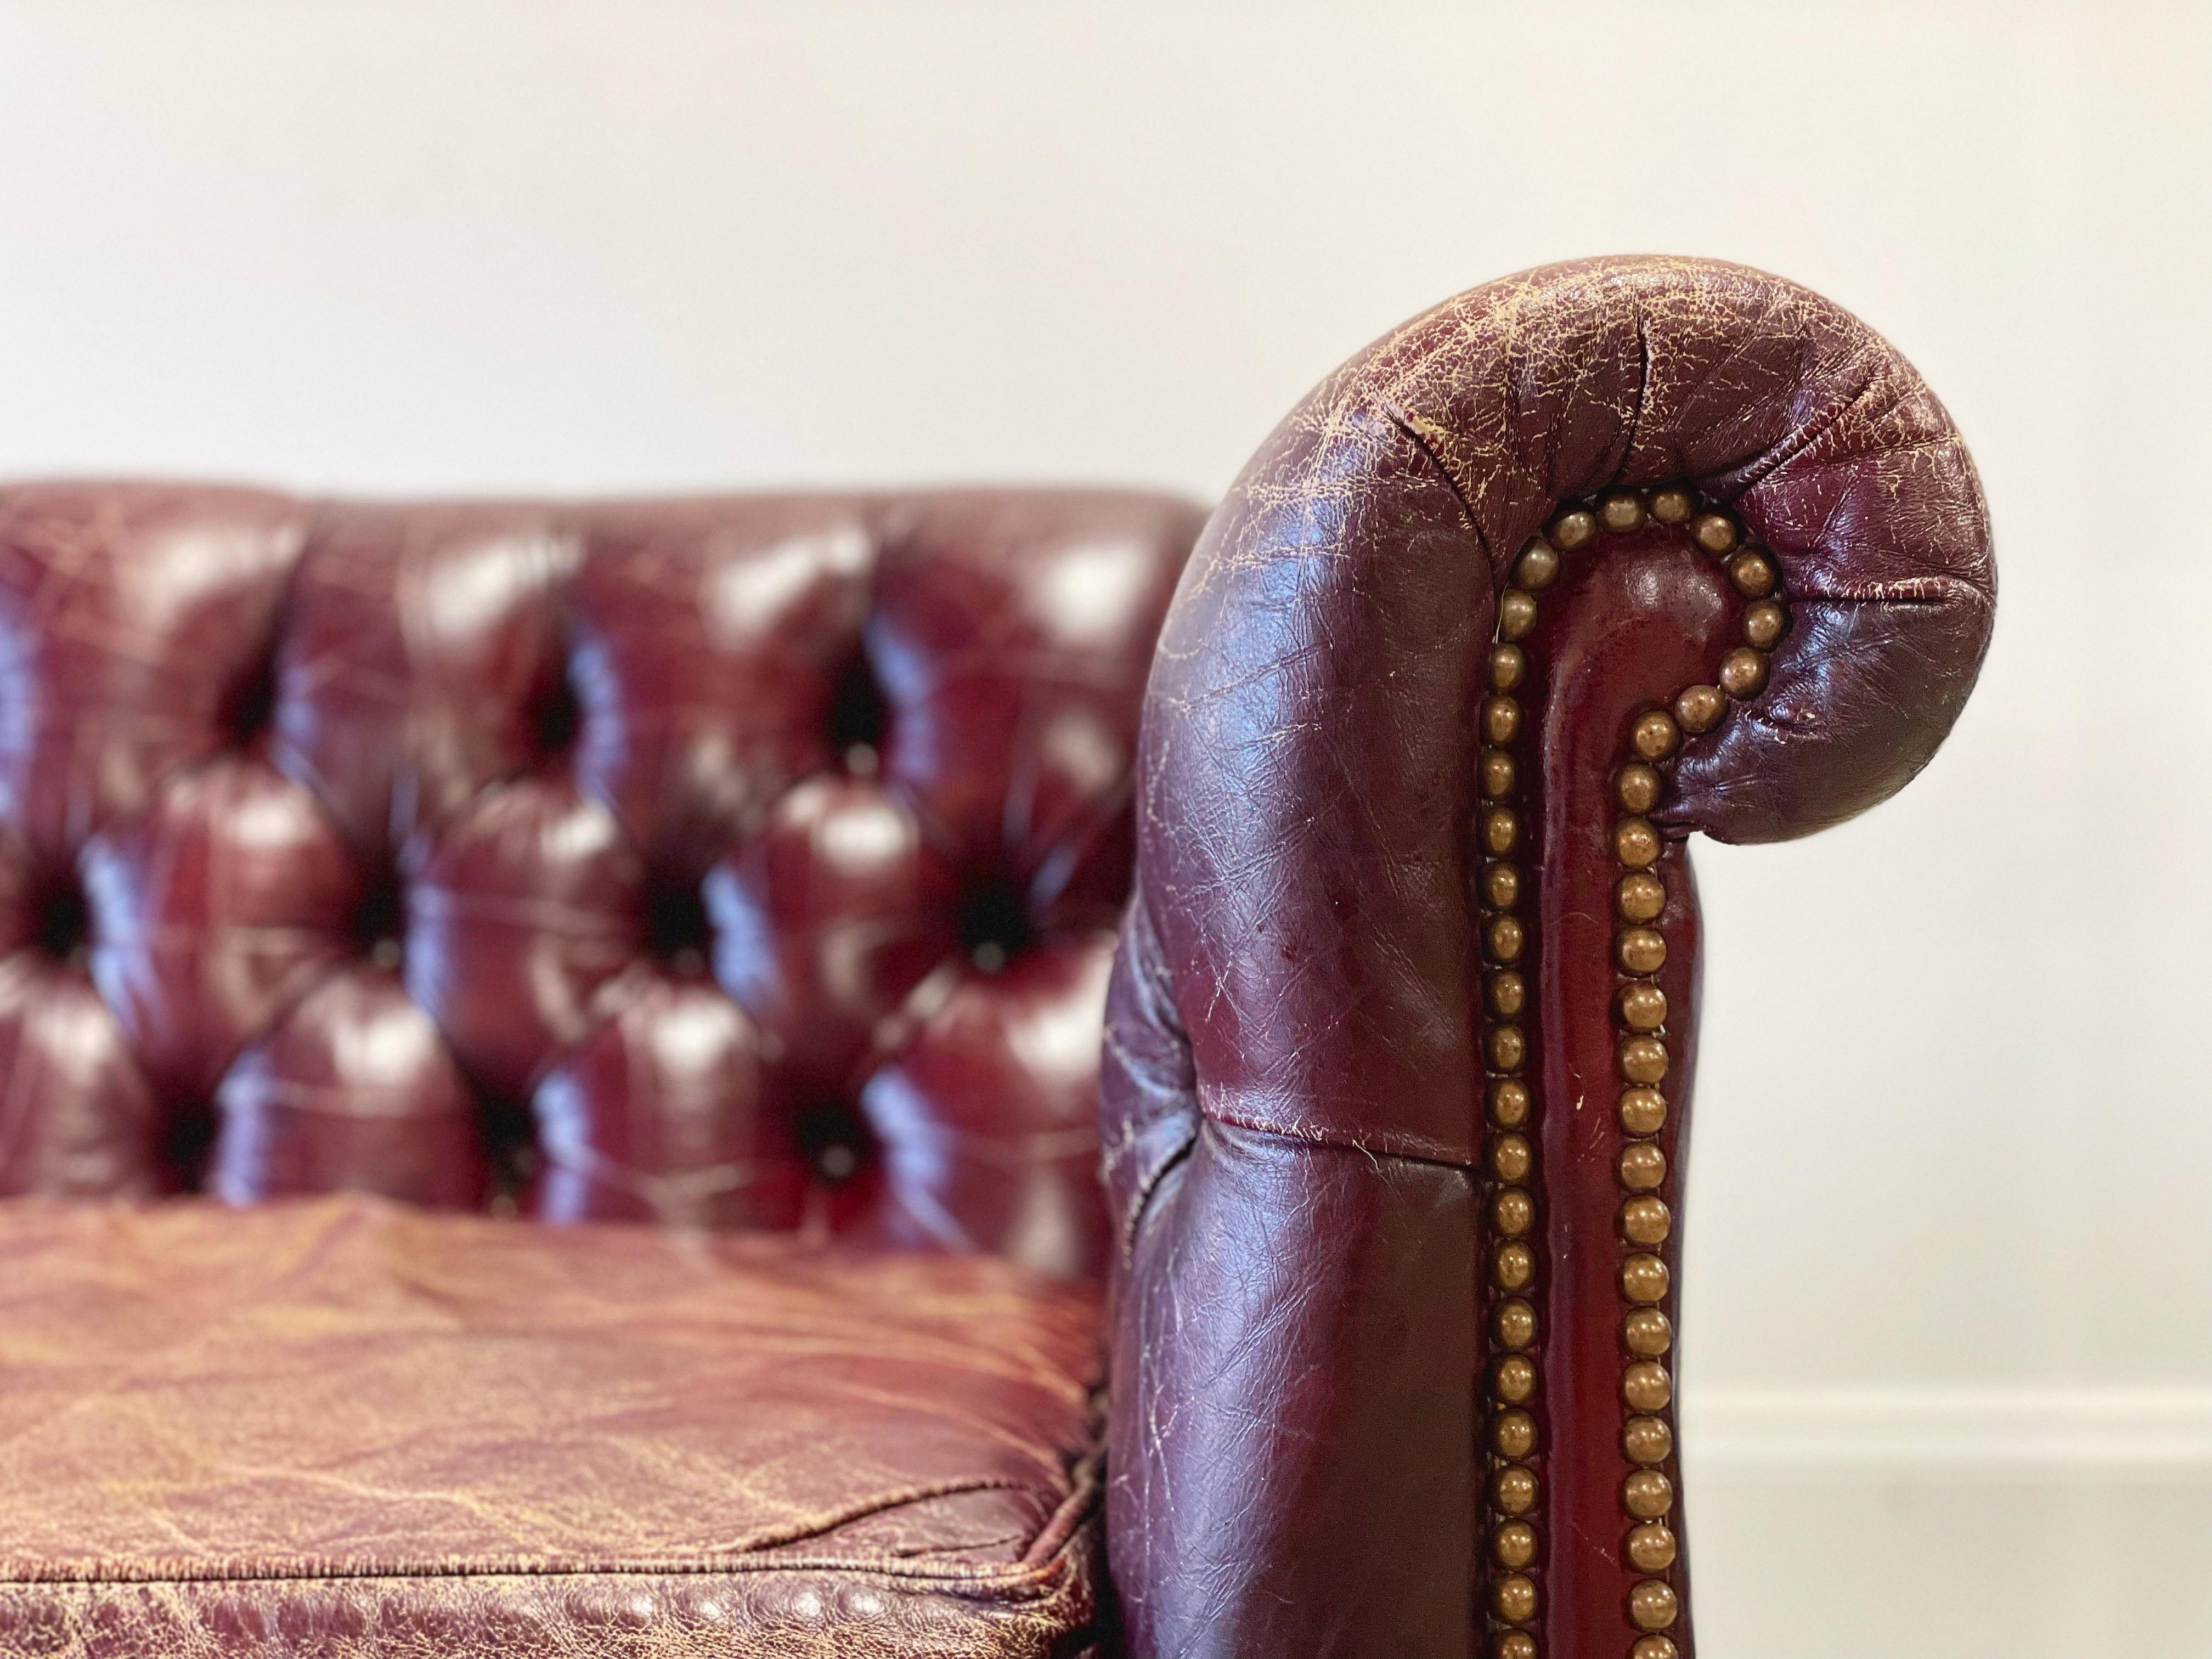 Vintage English Georgian style chesterfield sofa or settee in perfectly worn ox blood tone leather and solid sculpted mahogany frame. The frame is case shaped with rolled arms and decorative brass nail heads. Excellent joinery and craftsmanship with